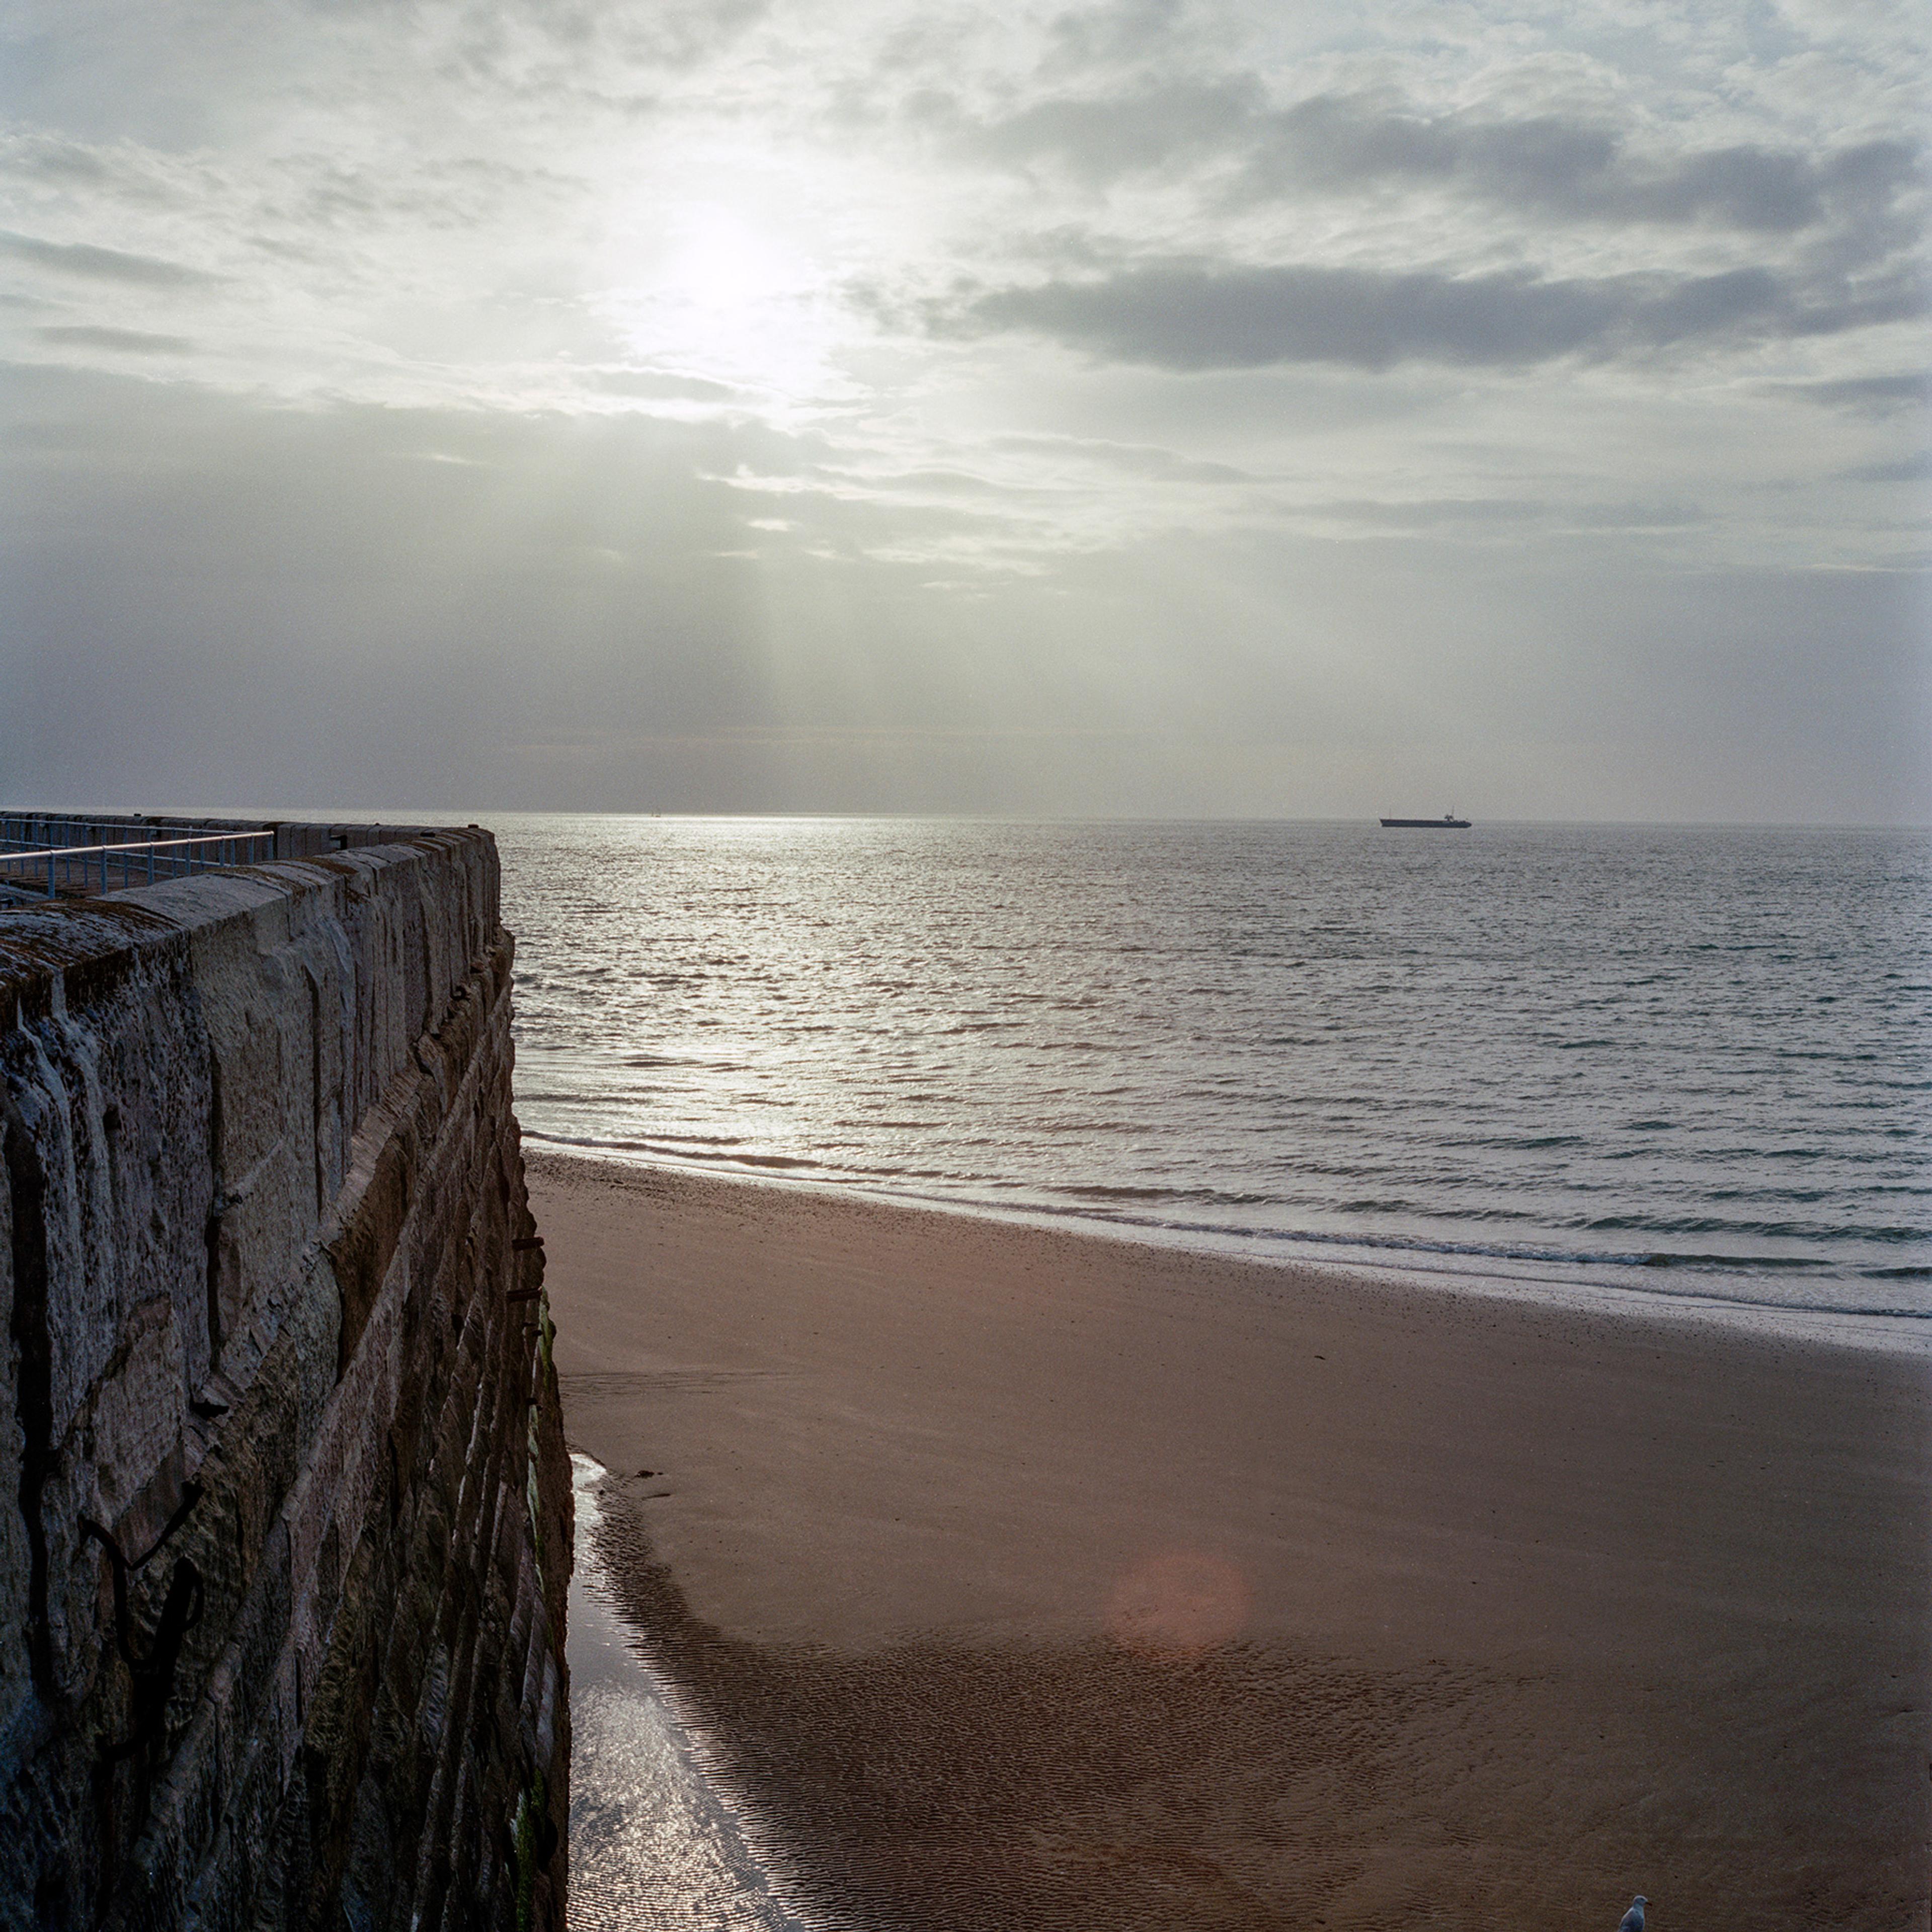 A coastal scene with a stone wall on the left, sandy beach below, and calm sea extending to the horizon. The sun is partially obscured by clouds, casting rays over the water. A distant ship is visible on the horizon.